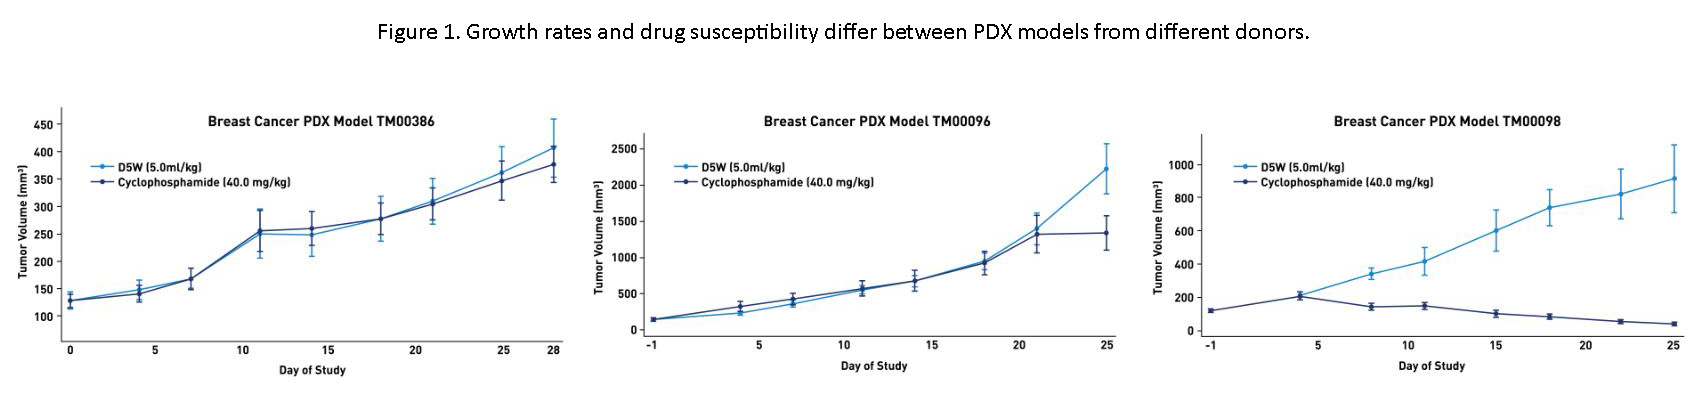 Figure 1. Growth rates and drug susceptibility differ between PDX models from different donors.